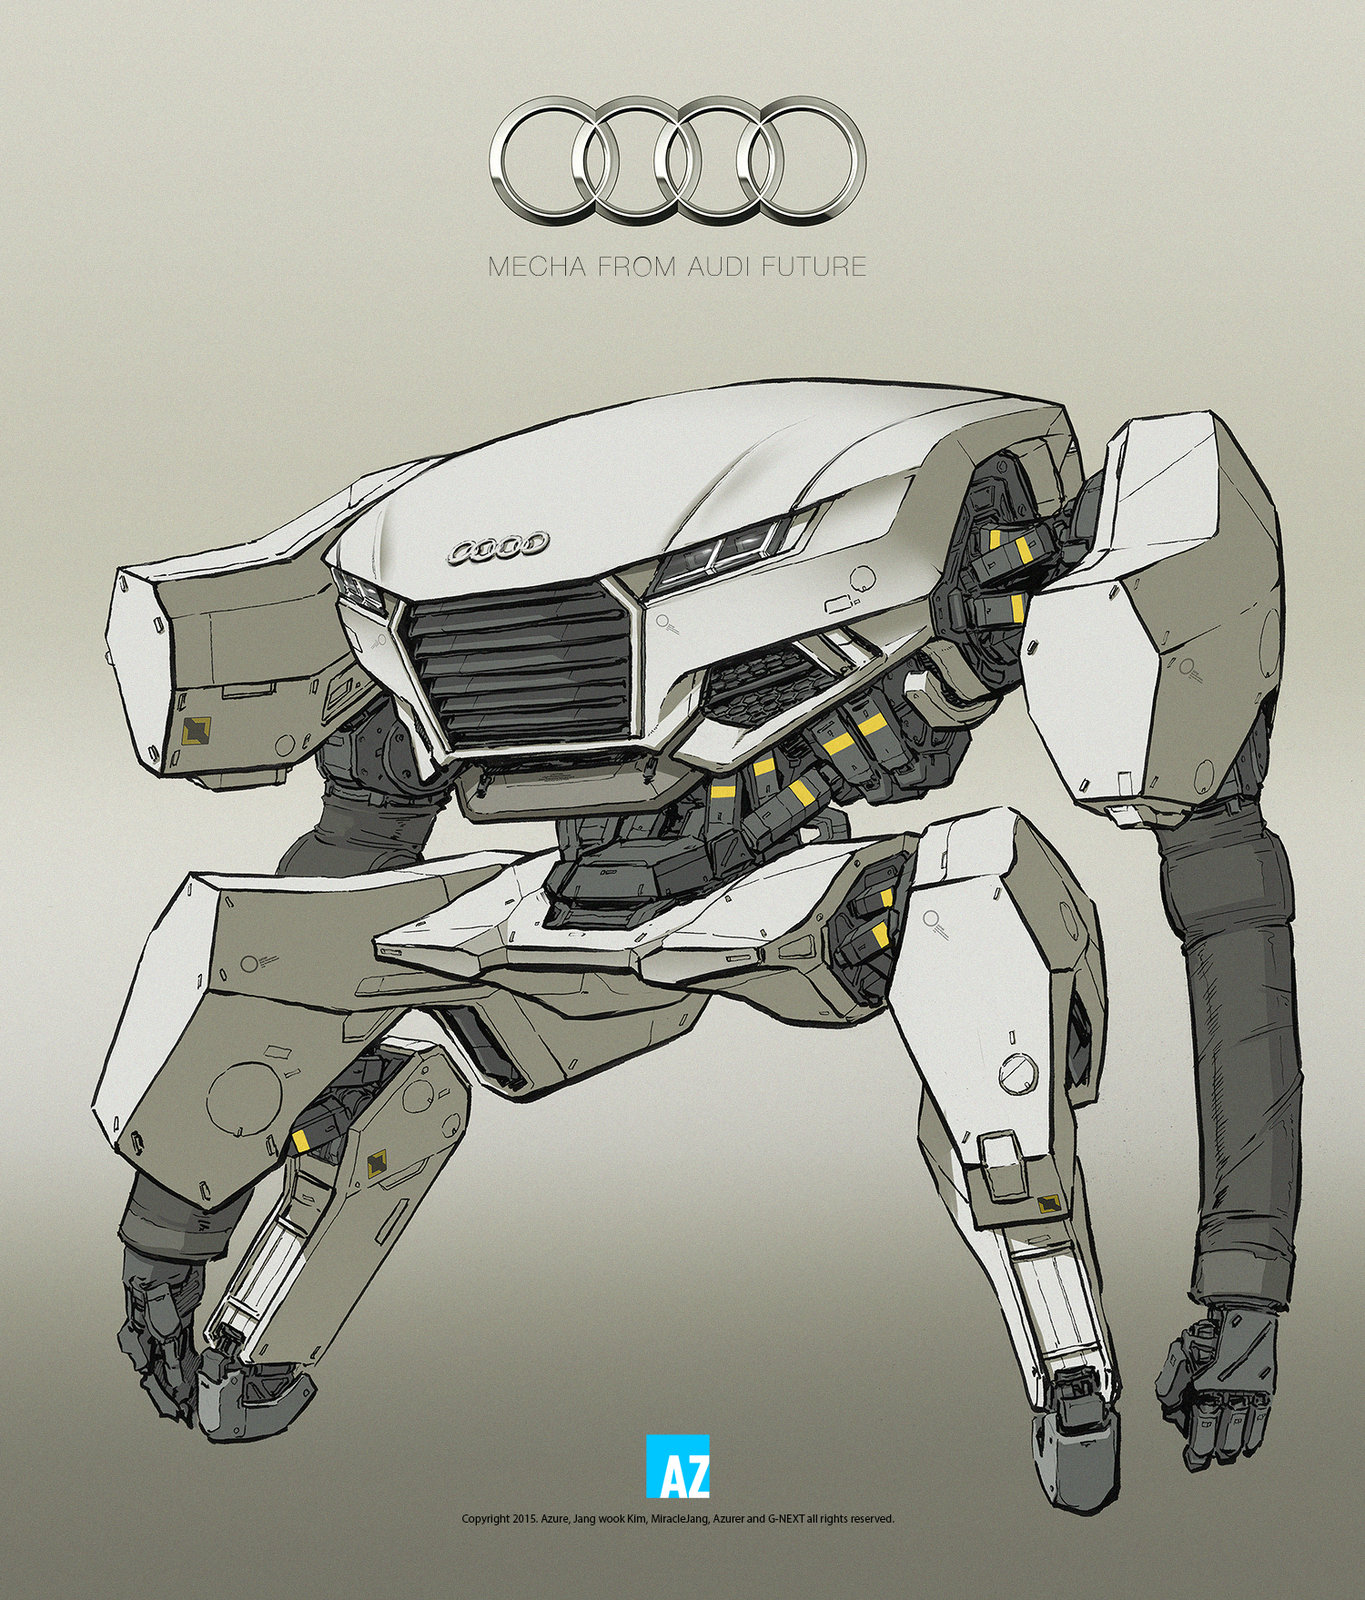 Mecha from the Audi future